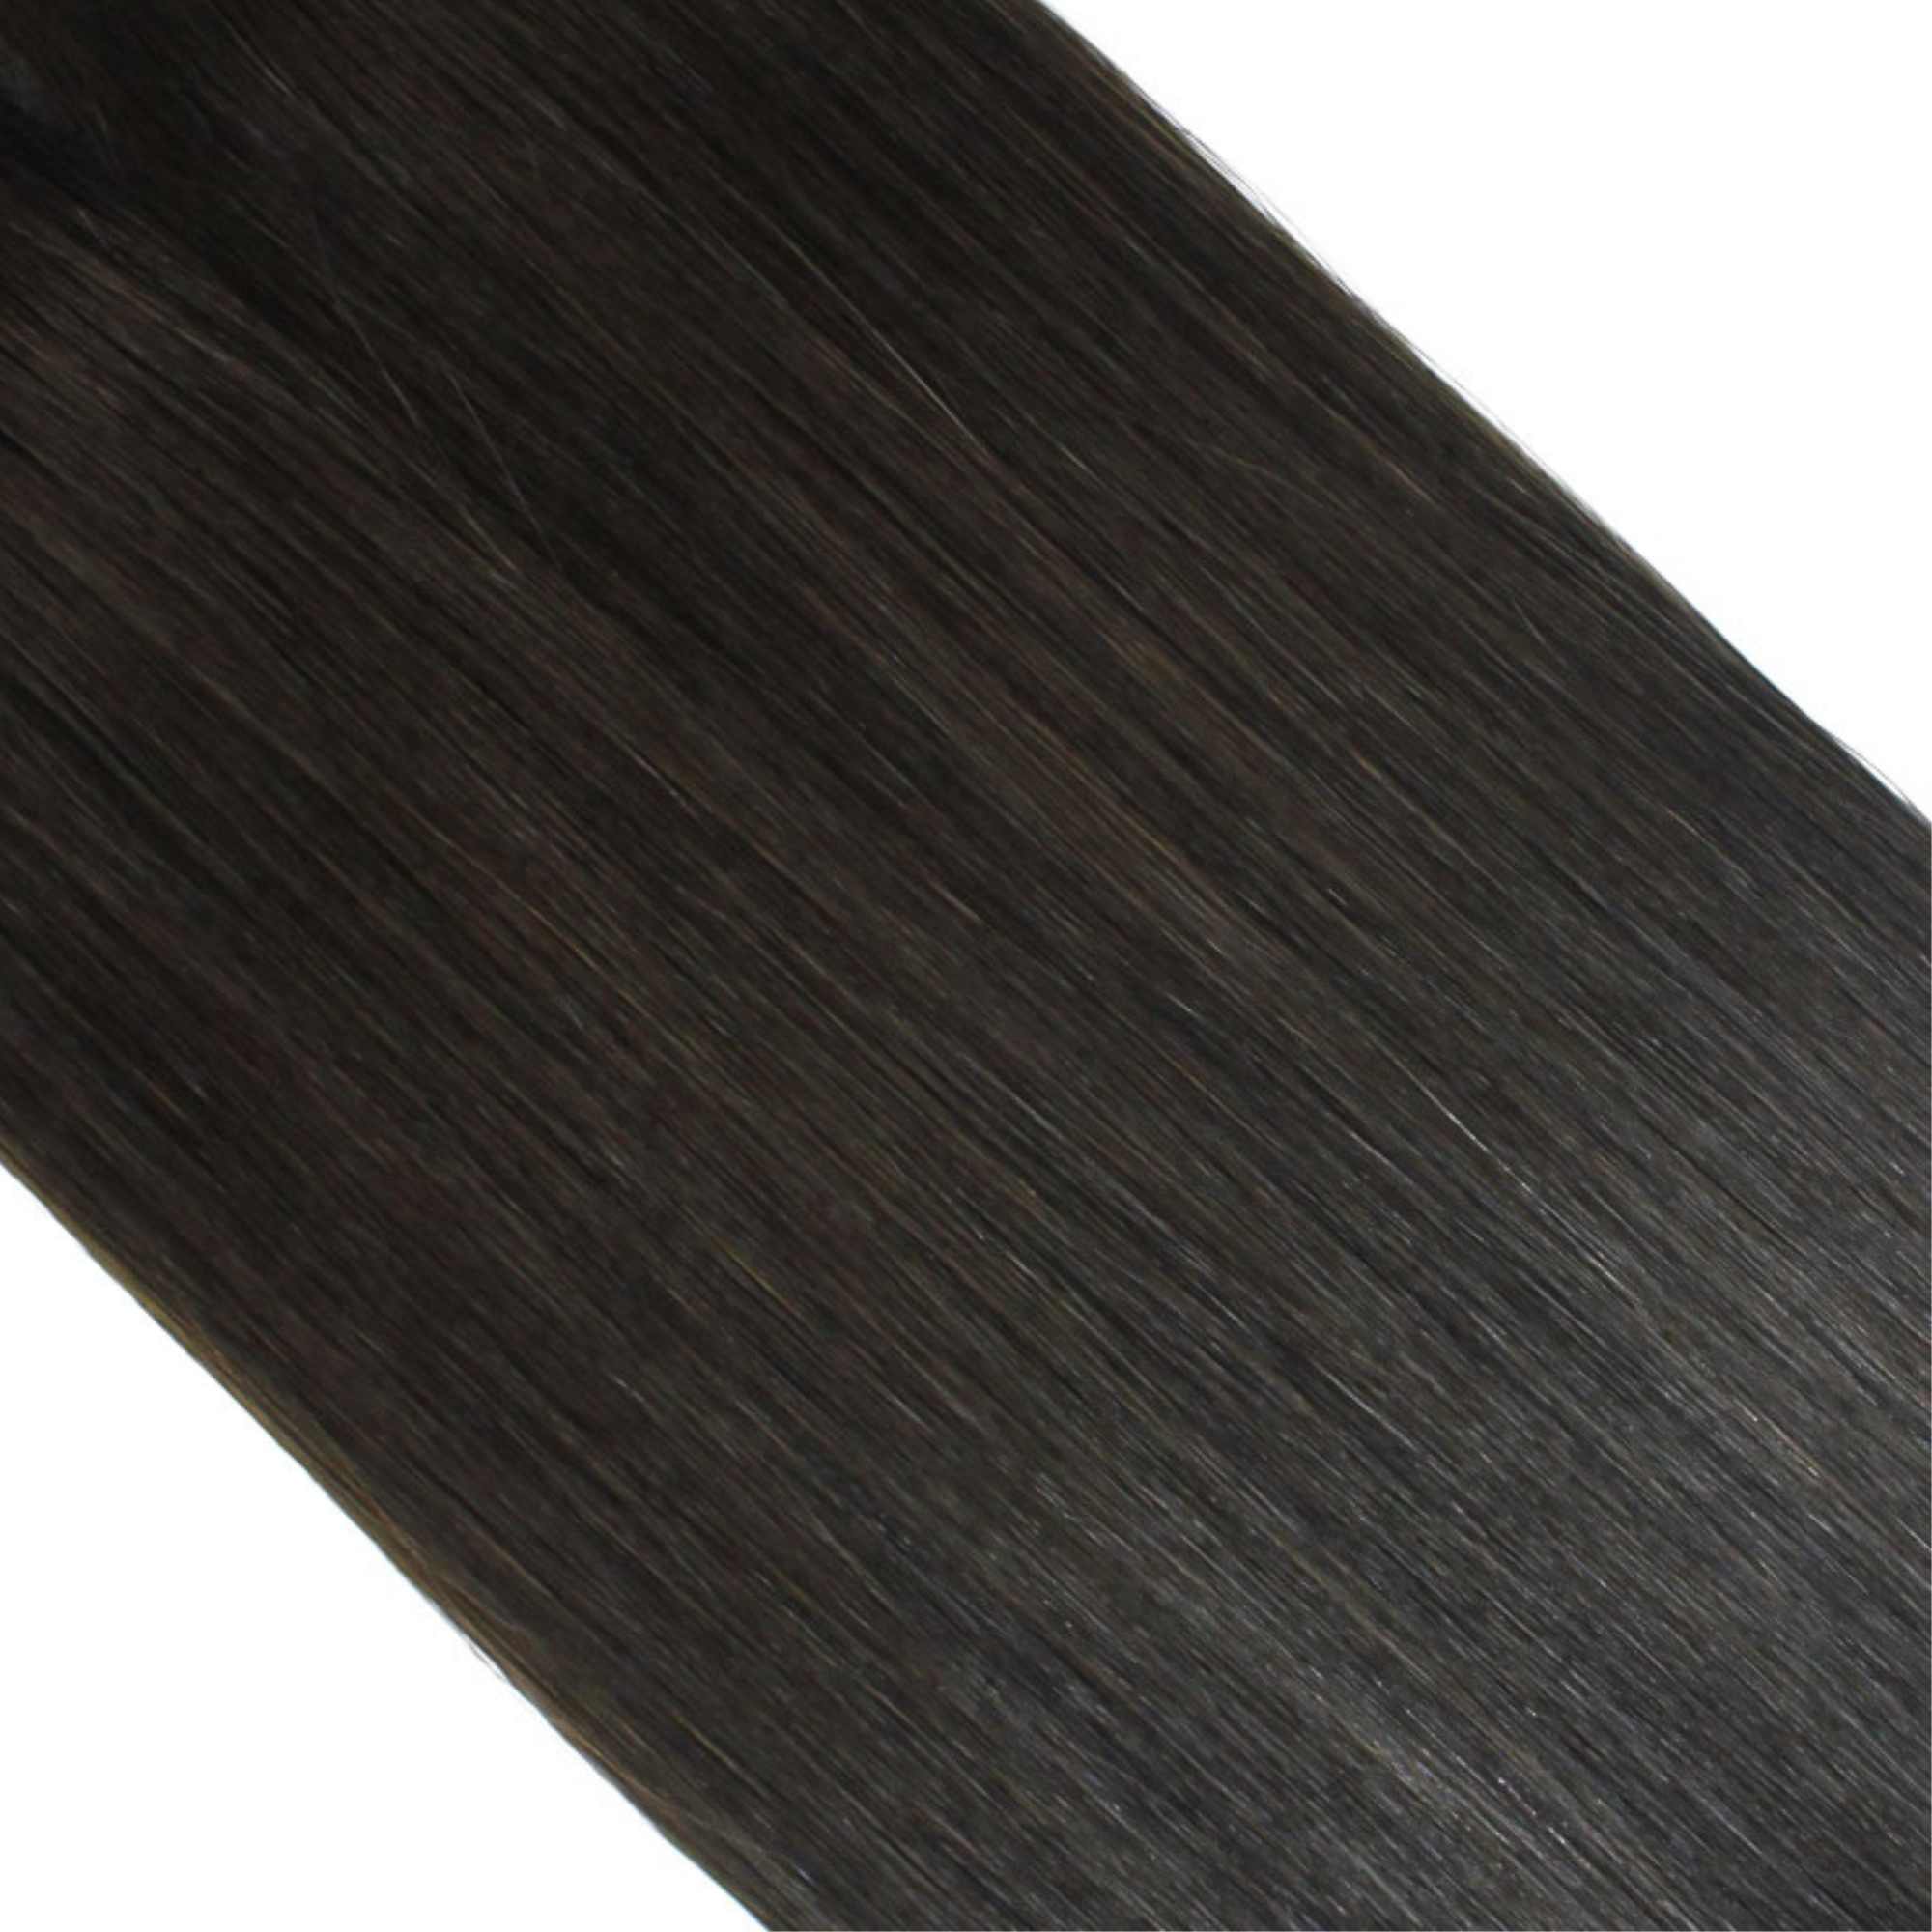 "hair rehab london 14" weft hair extensions shade swatch titled show stopper"